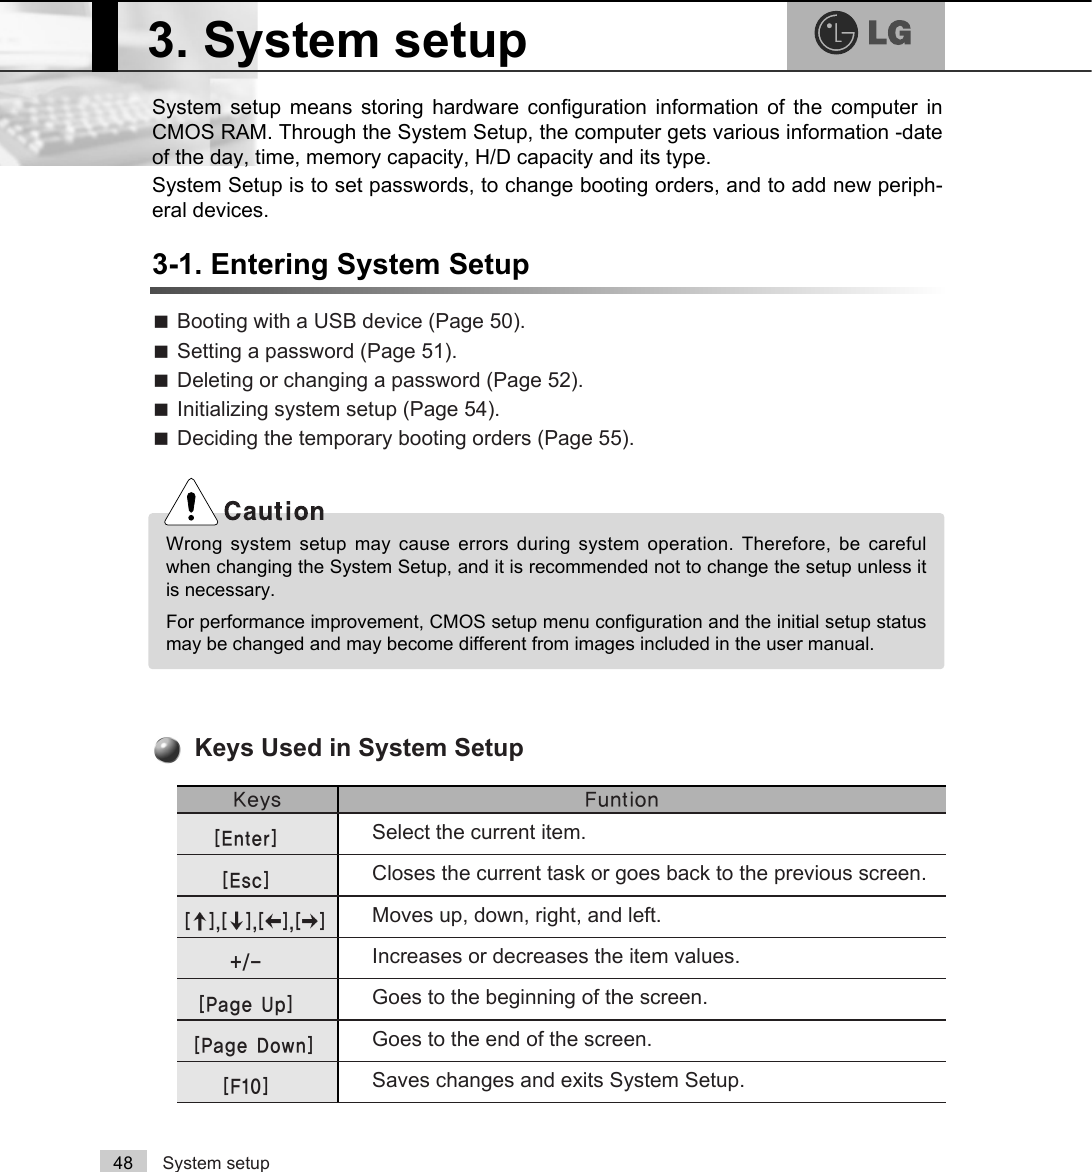 System setup48System setup means storing hardware configuration information of the computer inCMOS RAM. Through the System Setup, the computer gets various information -dateof the day, time, memory capacity, H/D capacity and its type. System Setup is to set passwords, to change booting orders, and to add new periph-eral devices.3-1. Entering System SetupãBooting with a USB device (Page 50).ãSetting a password (Page 51).ãDeleting or changing a password (Page 52).ãInitializing system setup (Page 54).ãDeciding the temporary booting orders (Page 55)..H\V )XQWLRQSelect the current item.&gt;(QWHU@Closes the current task or goes back to the previous screen.&gt;(VF@Moves up, down, right, and left. &gt;Ⓑ@&gt;Ⓒ@&gt;⒵@&gt;Ⓐ@Increases or decreases the item values. Goes to the beginning of the screen. Goes to the end of the screen. Saves changes and exits System Setup. &gt;3DJH8S@&gt;3DJH&apos;RZQ@&gt;)@Keys Used in System Setup 3. System setupWrong system setup may cause errors during system operation. Therefore, be carefulwhen changing the System Setup, and it is recommended not to change the setup unless itis necessary. For performance improvement, CMOS setup menu configuration and the initial setup statusmay be changed and may become different from images included in the user manual.